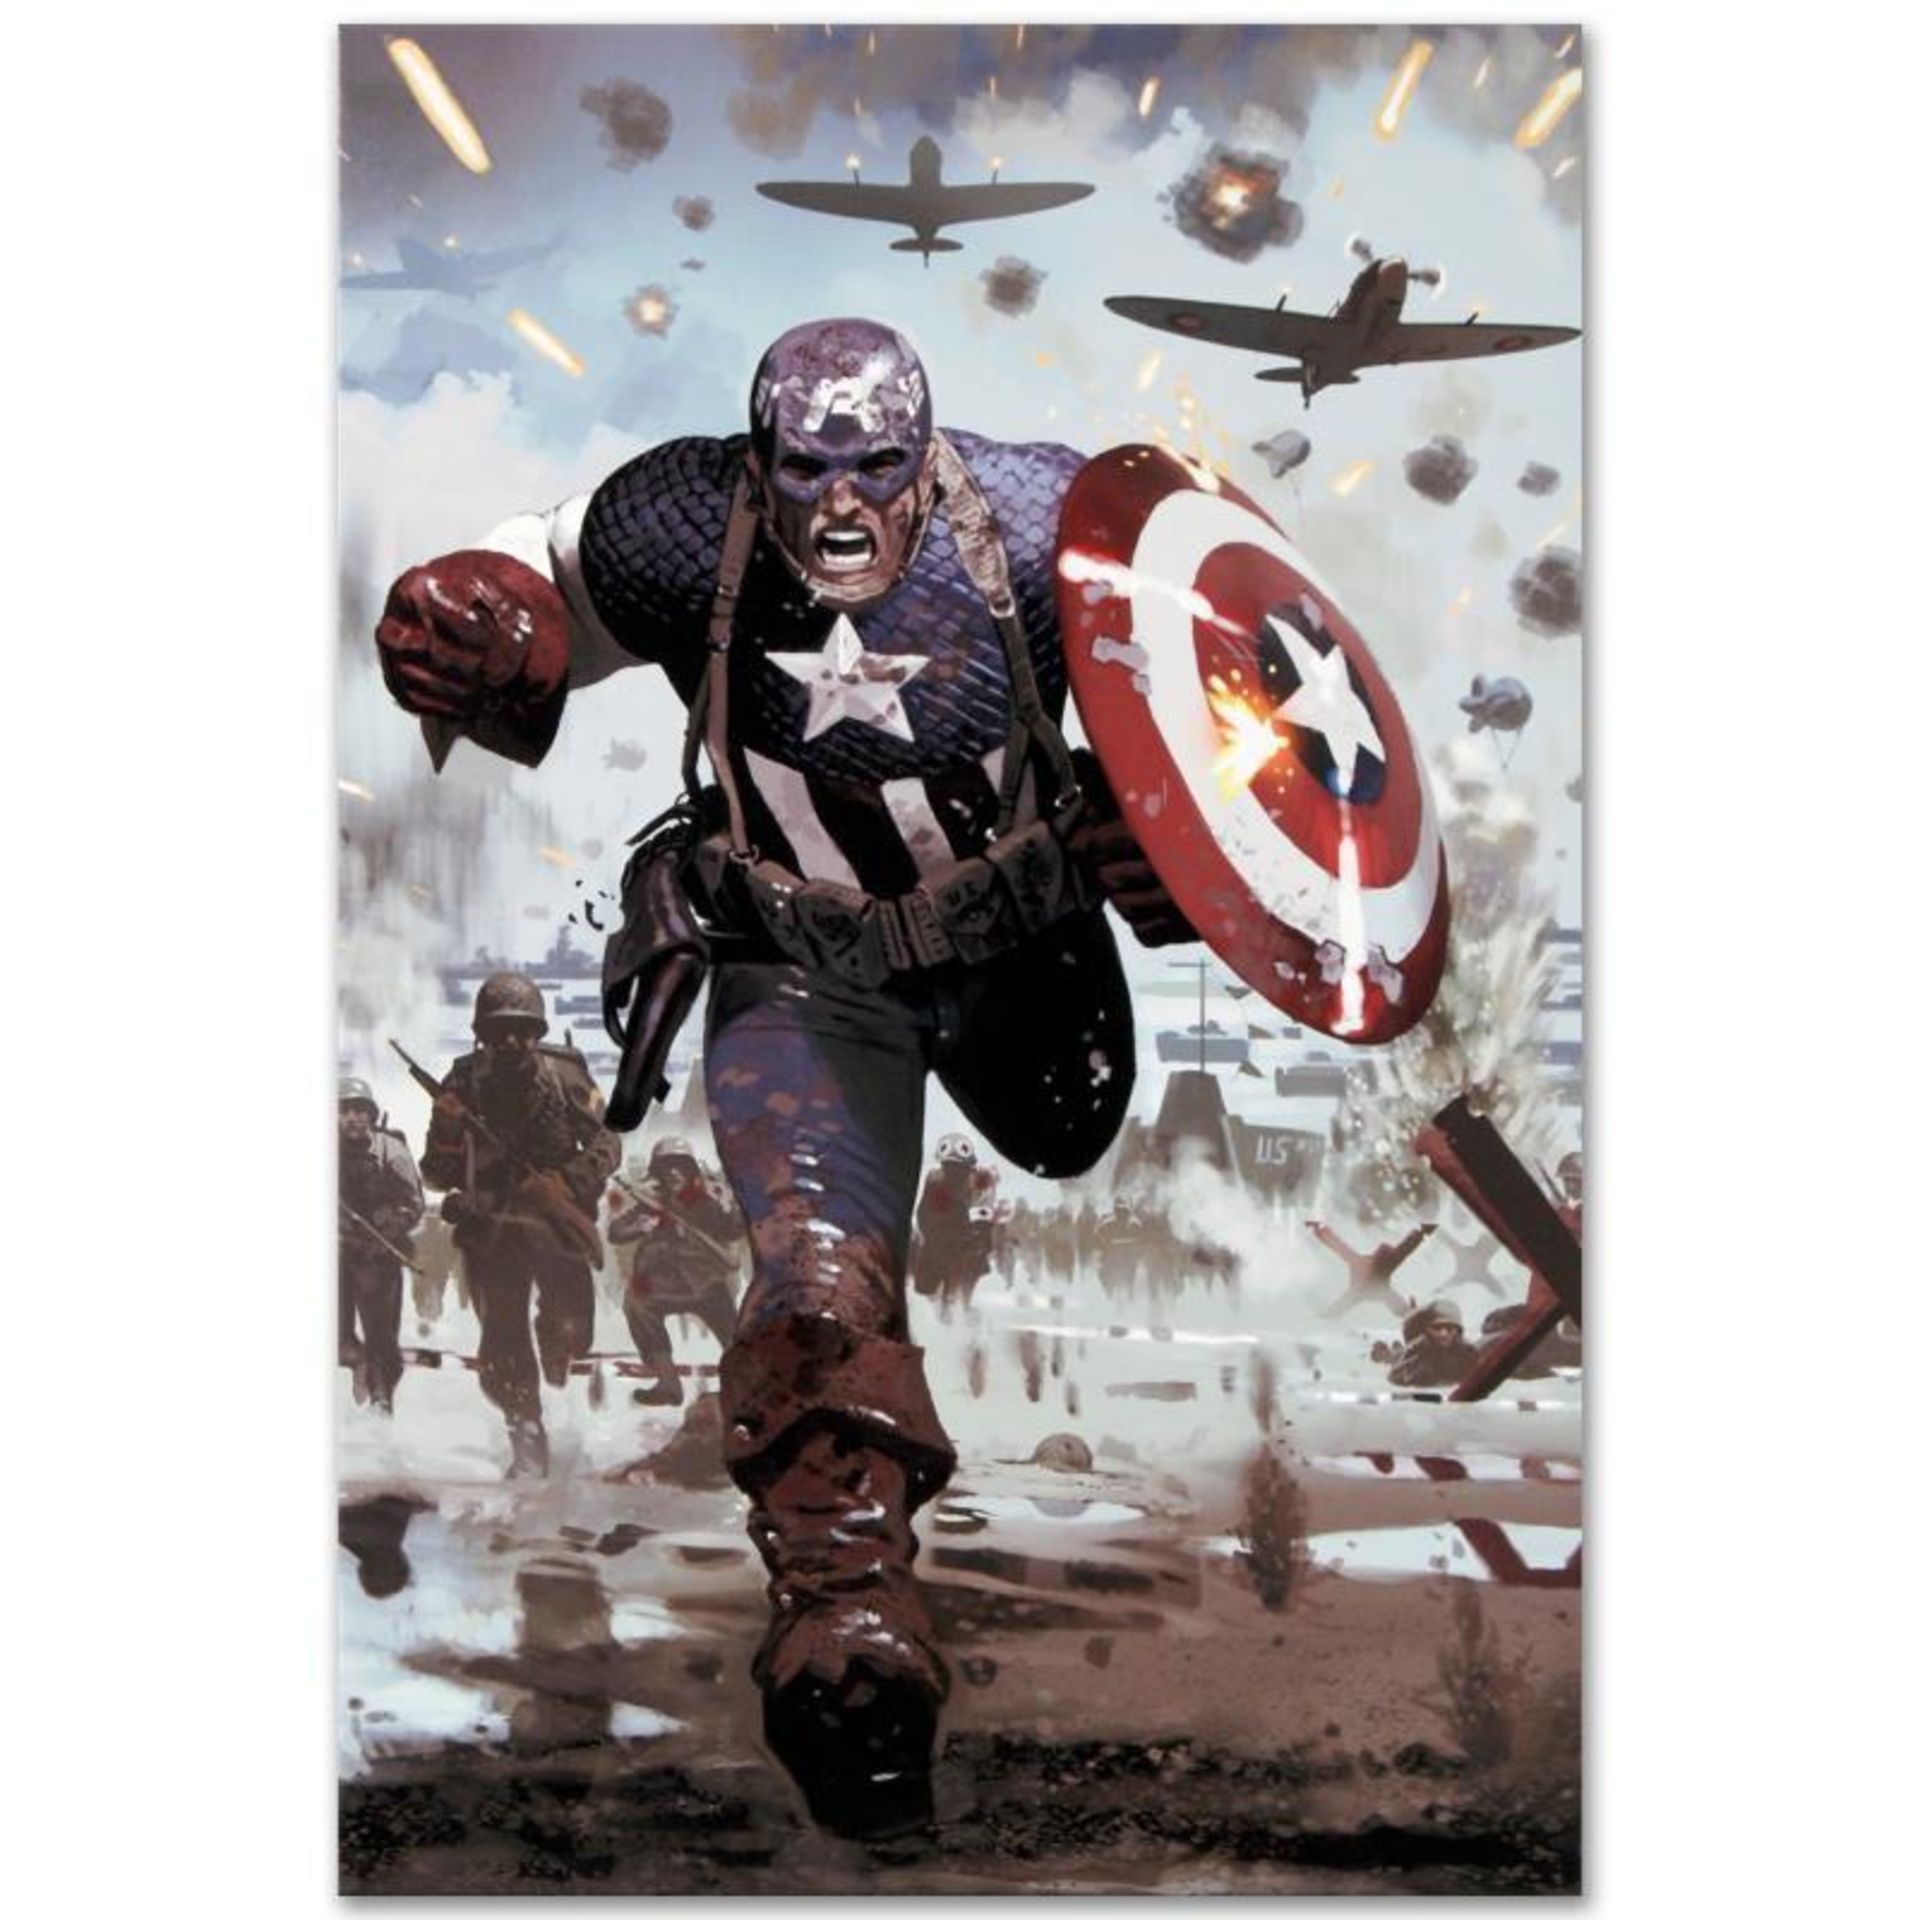 Marvel Comics "Captain America #615" Numbered Limited Edition Giclee on Canvas b